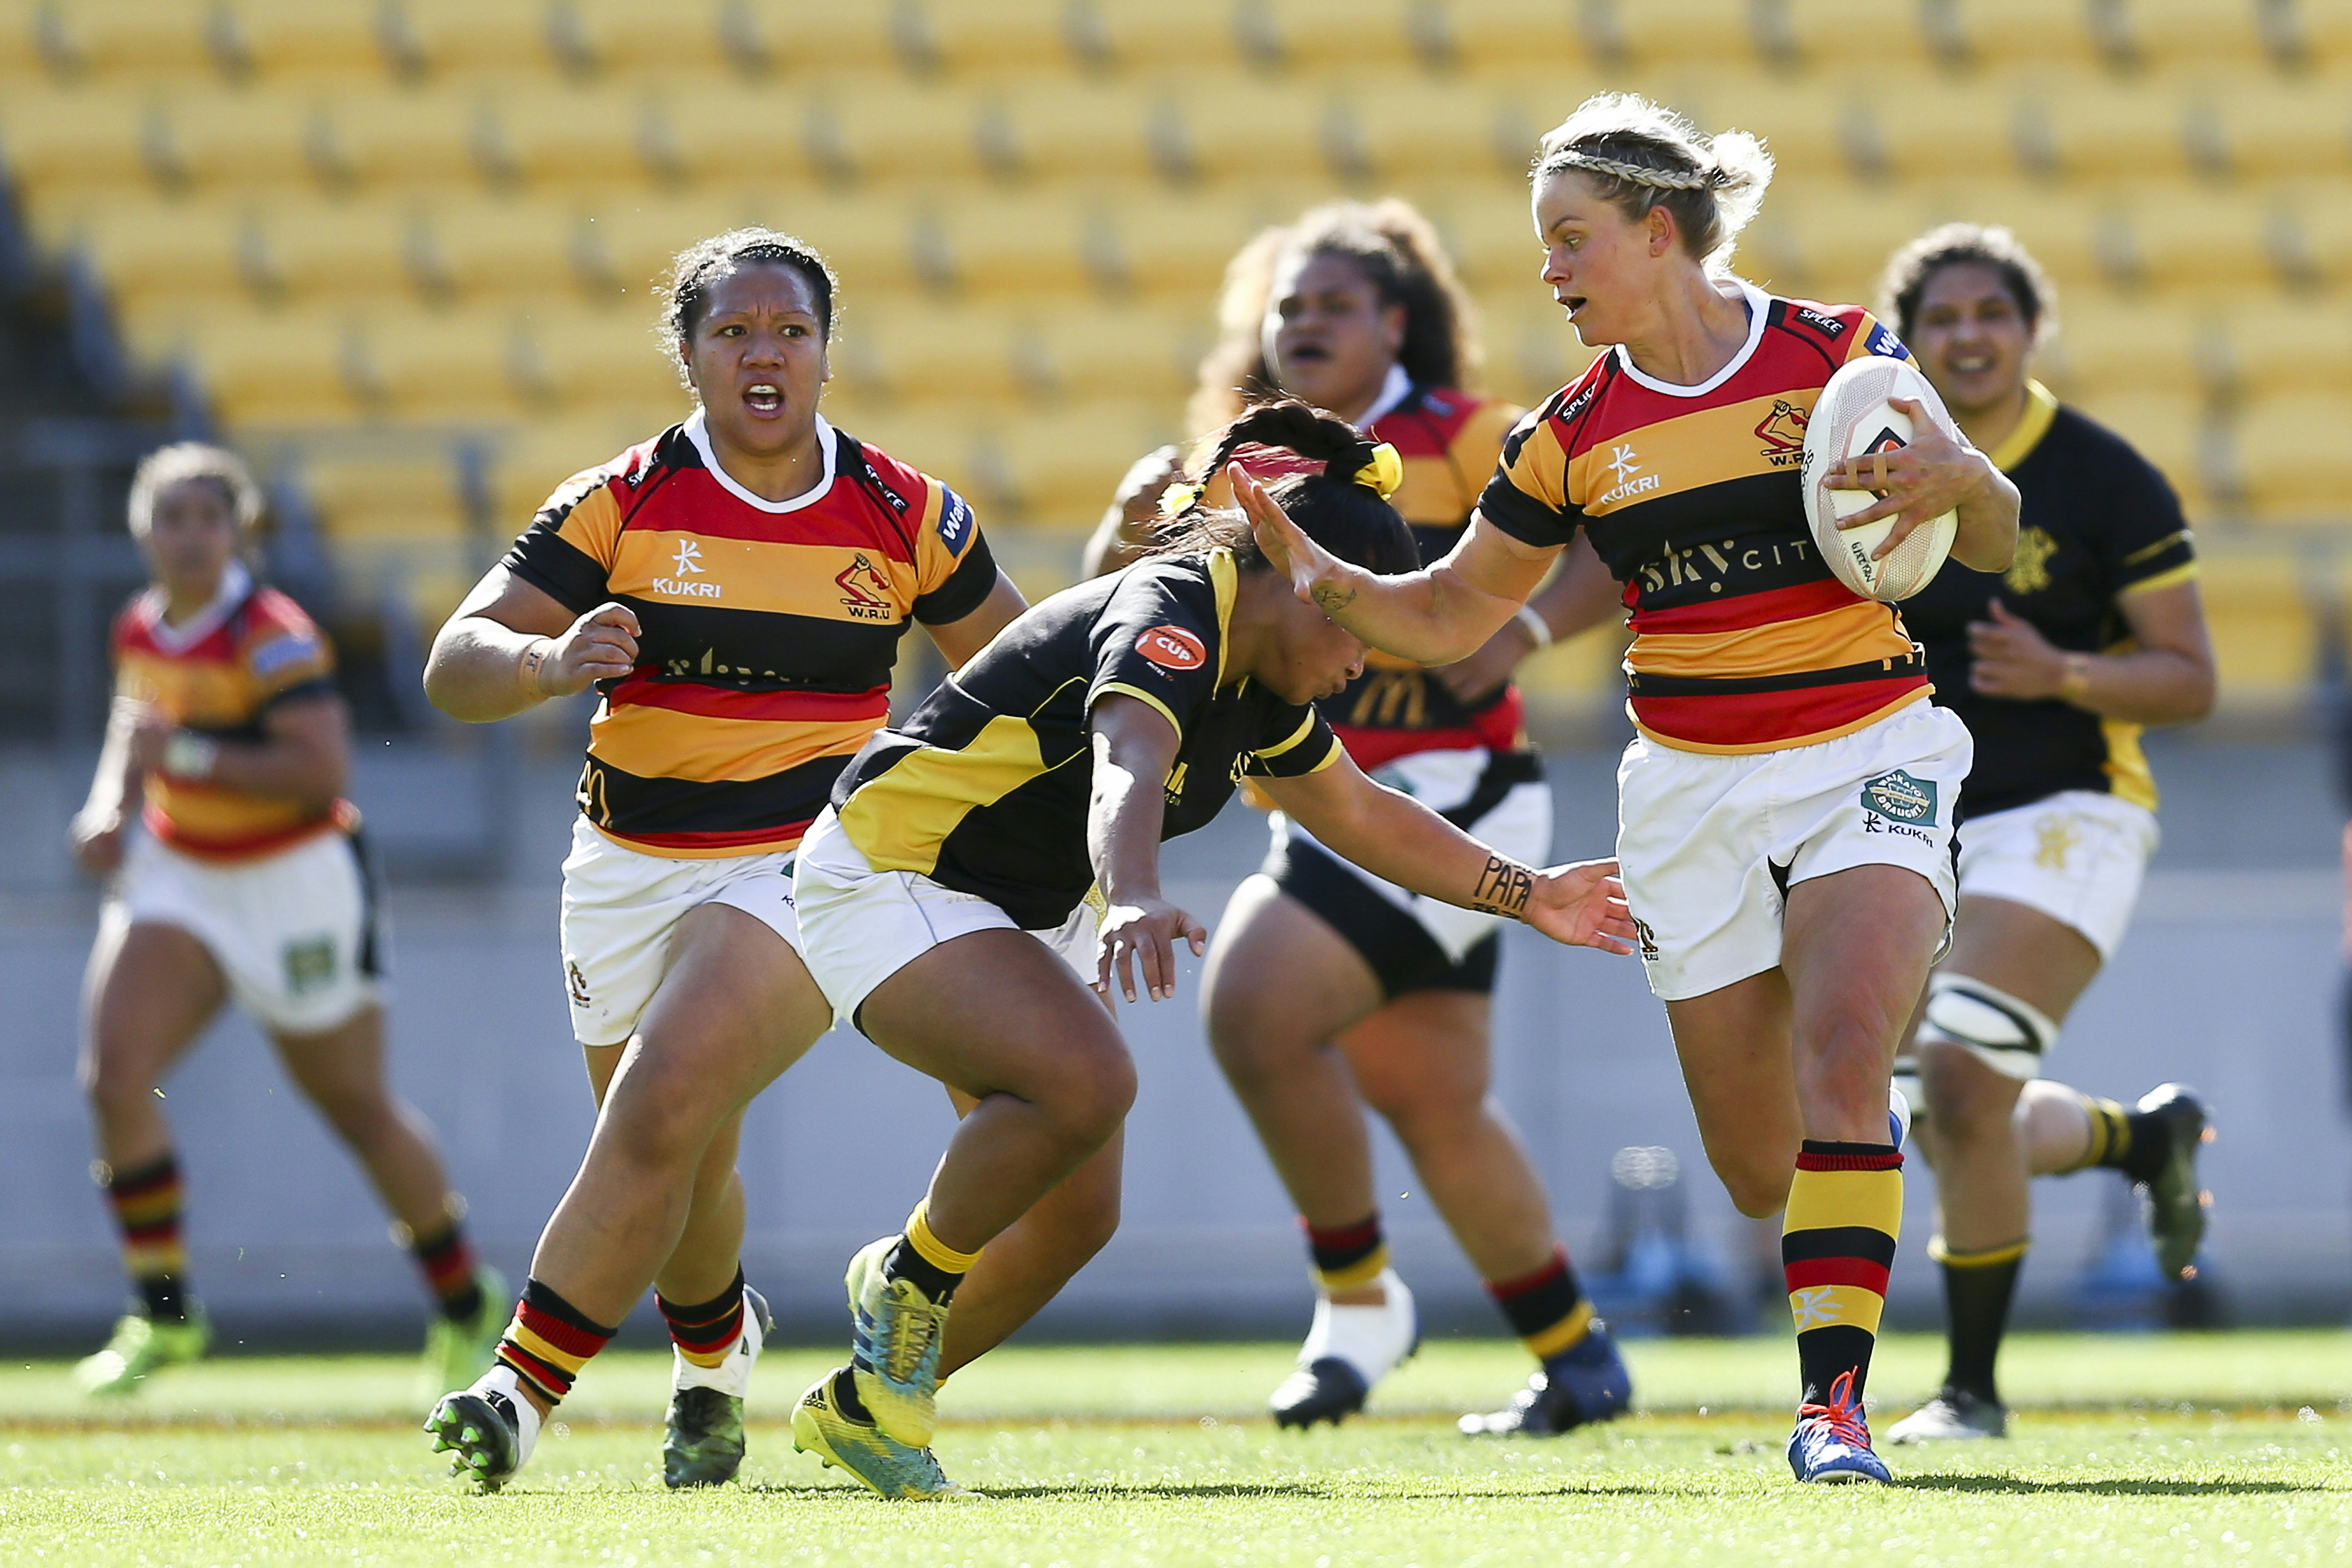 Chelsea Alley of Waikato, who is running towards the camera with ball in hand, is tackled during a match between Wellington and Waikato at Westpac Stadium.